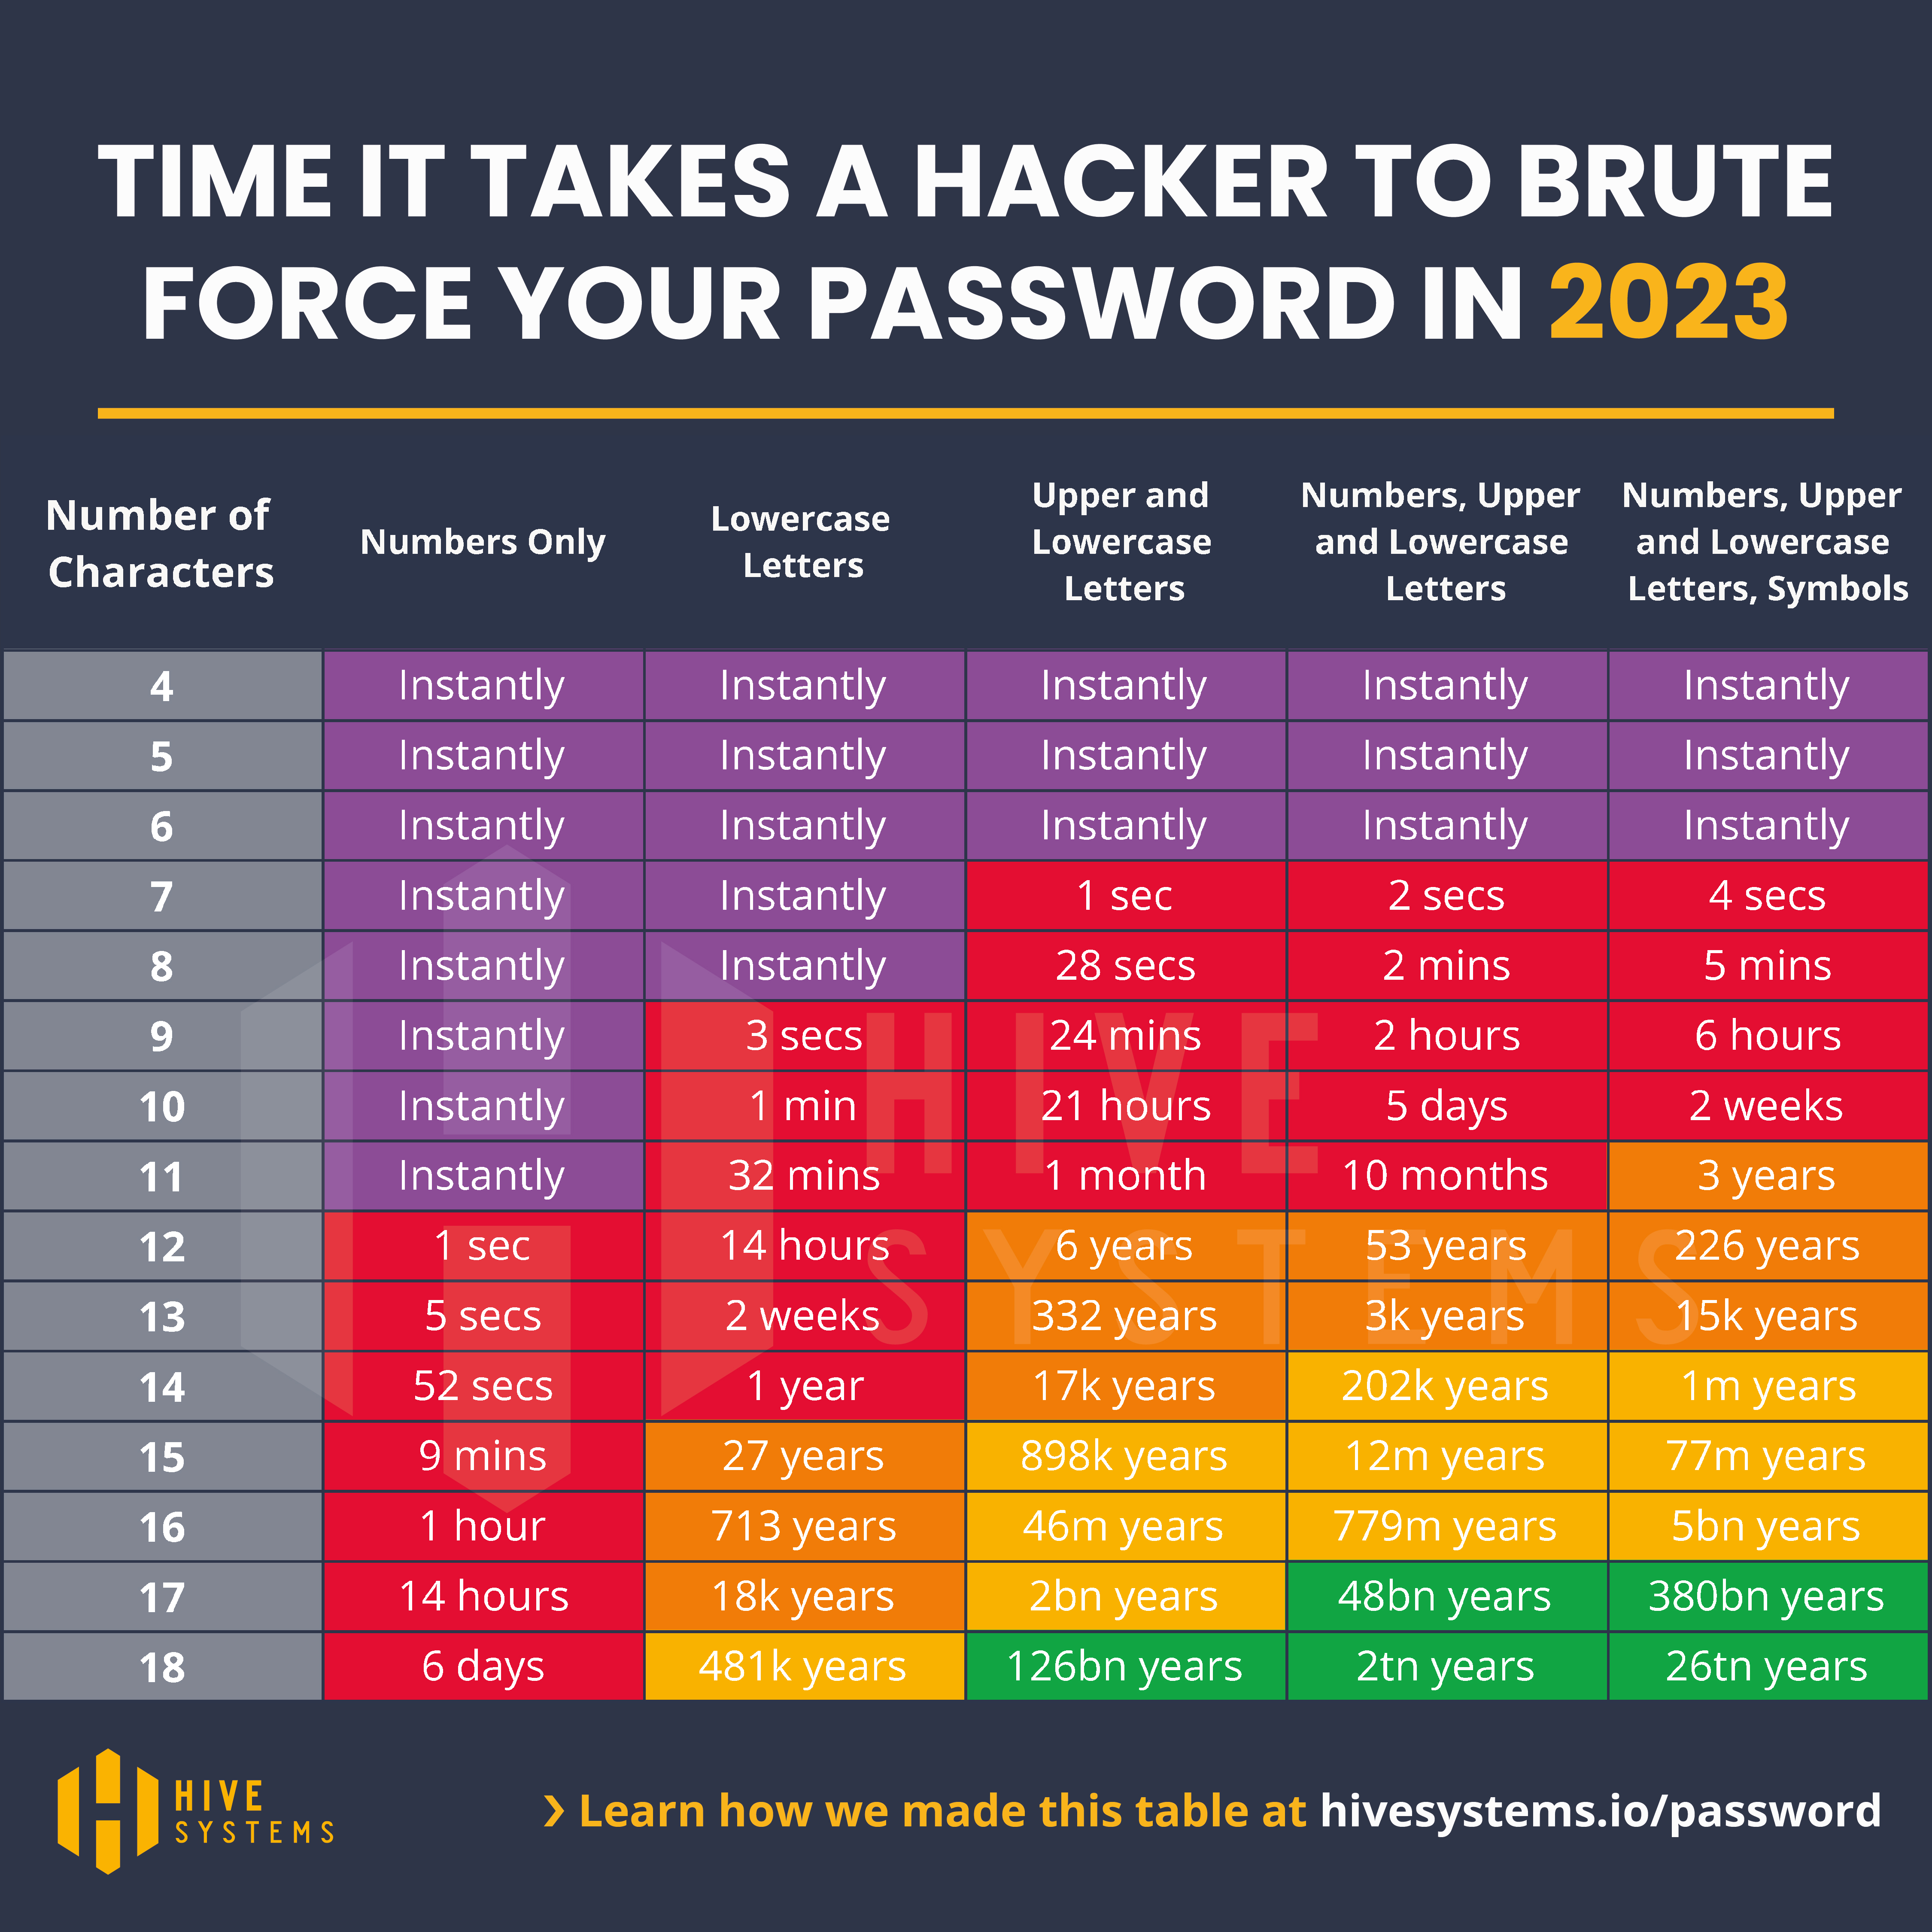 This  table shows the time it would take a hacker to brute-force crack your password for different types of characters as well as character count: